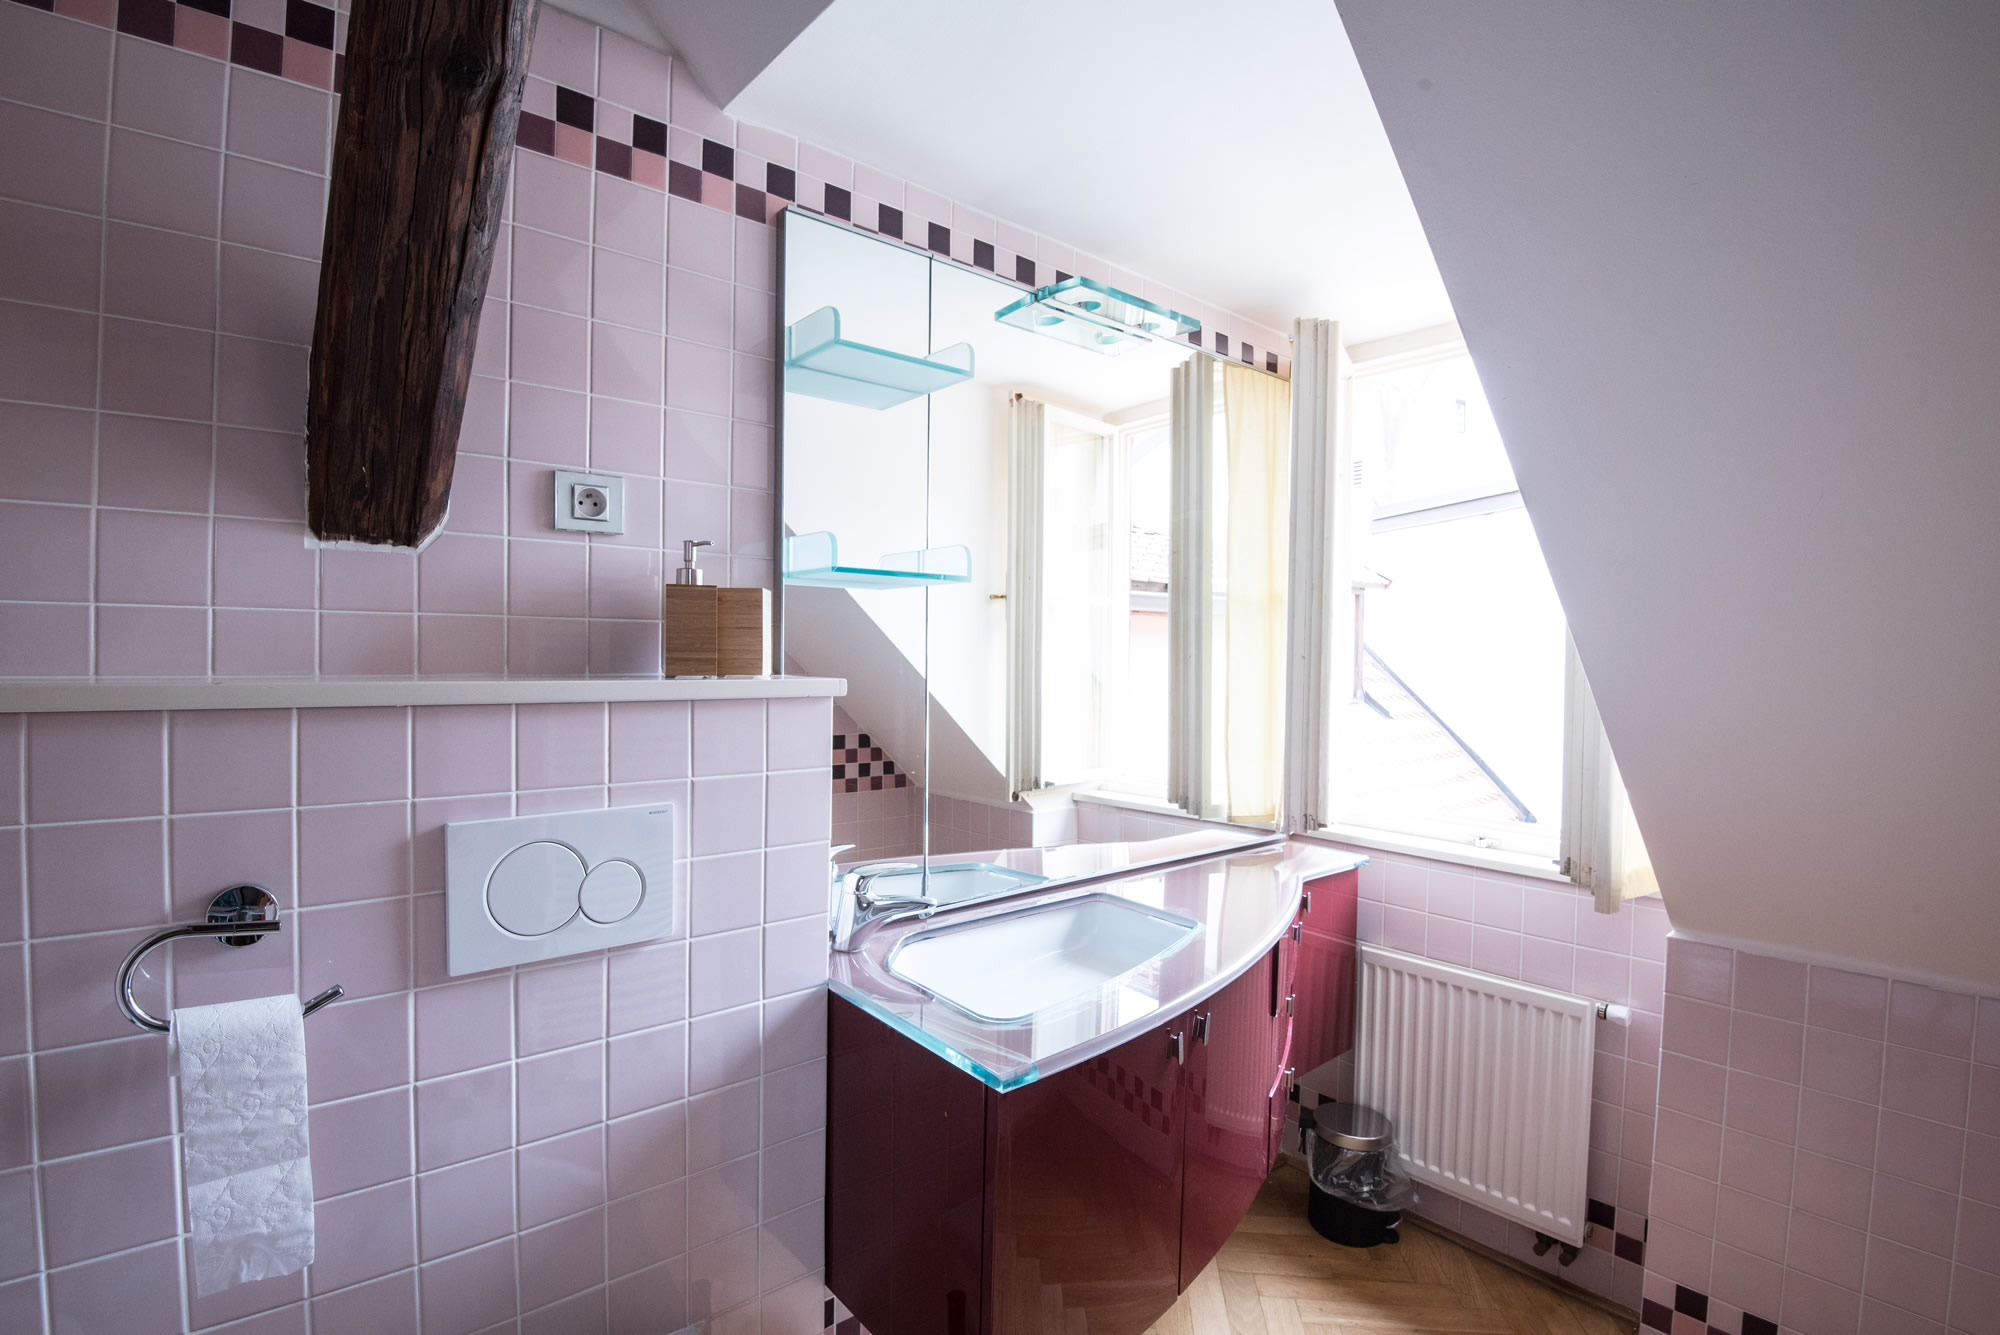 Bathroom covered with pink tiles. A mirror on the wall.